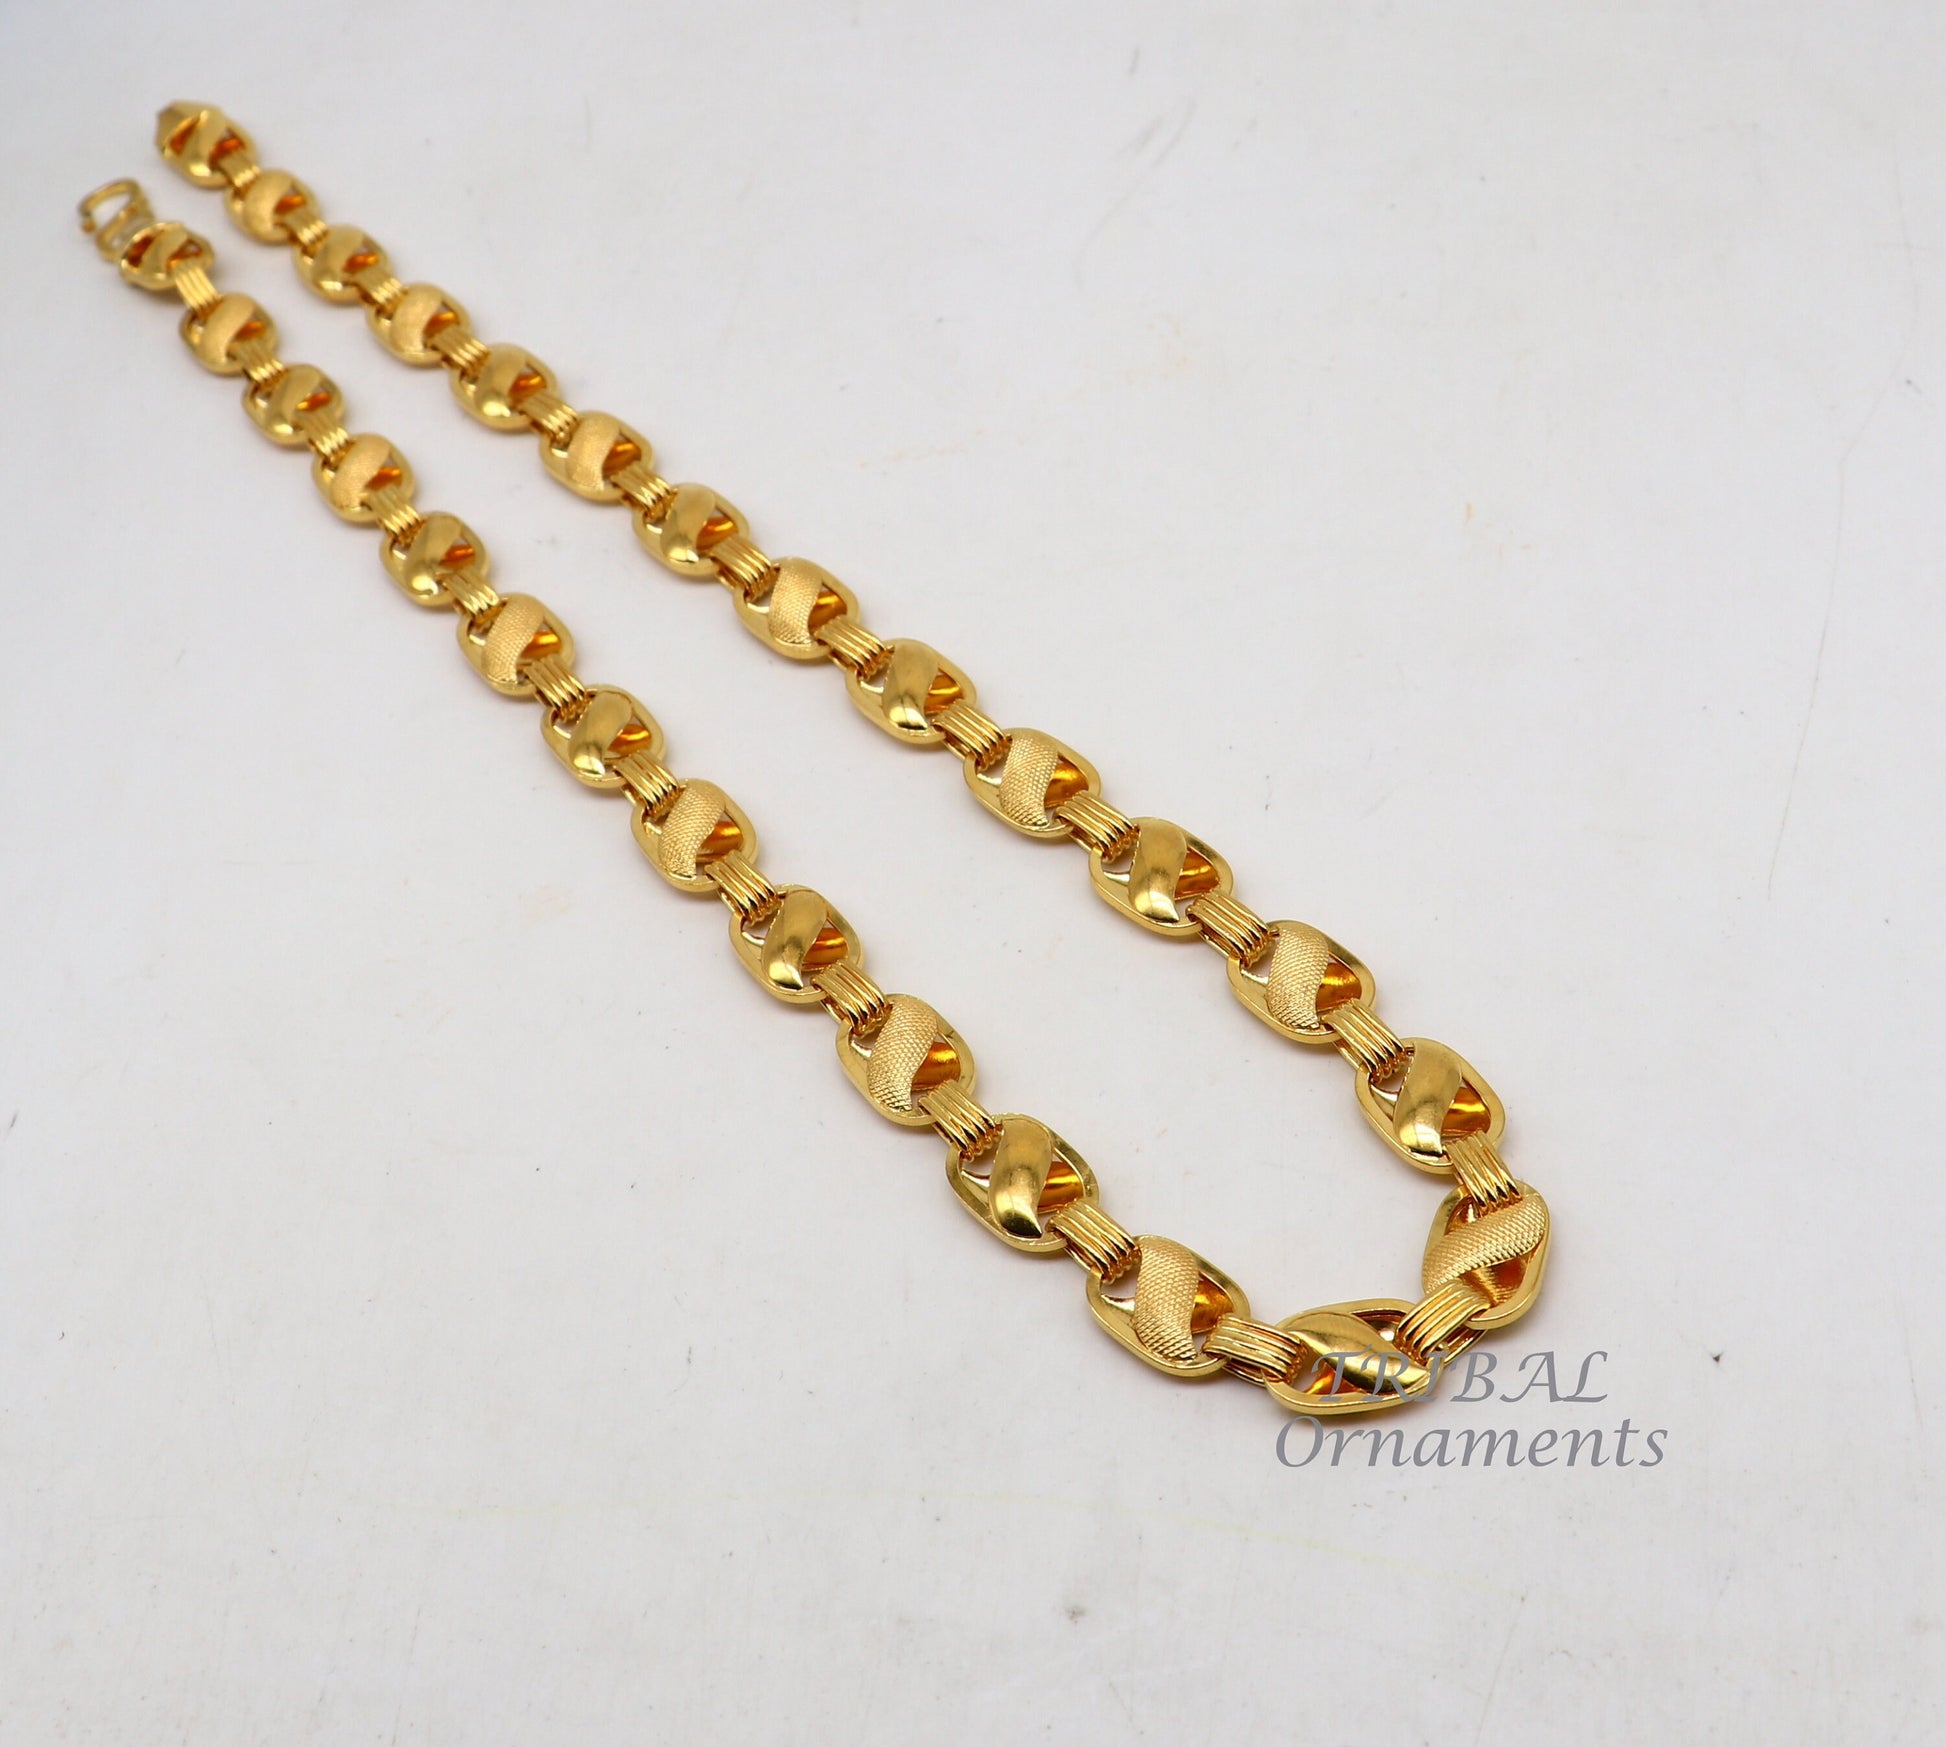 22k yellow gold handmade fabulous Lotus chain necklace excellent gold men's boy's chain certified unique handmade  gifting jewelry ch566 - TRIBAL ORNAMENTS